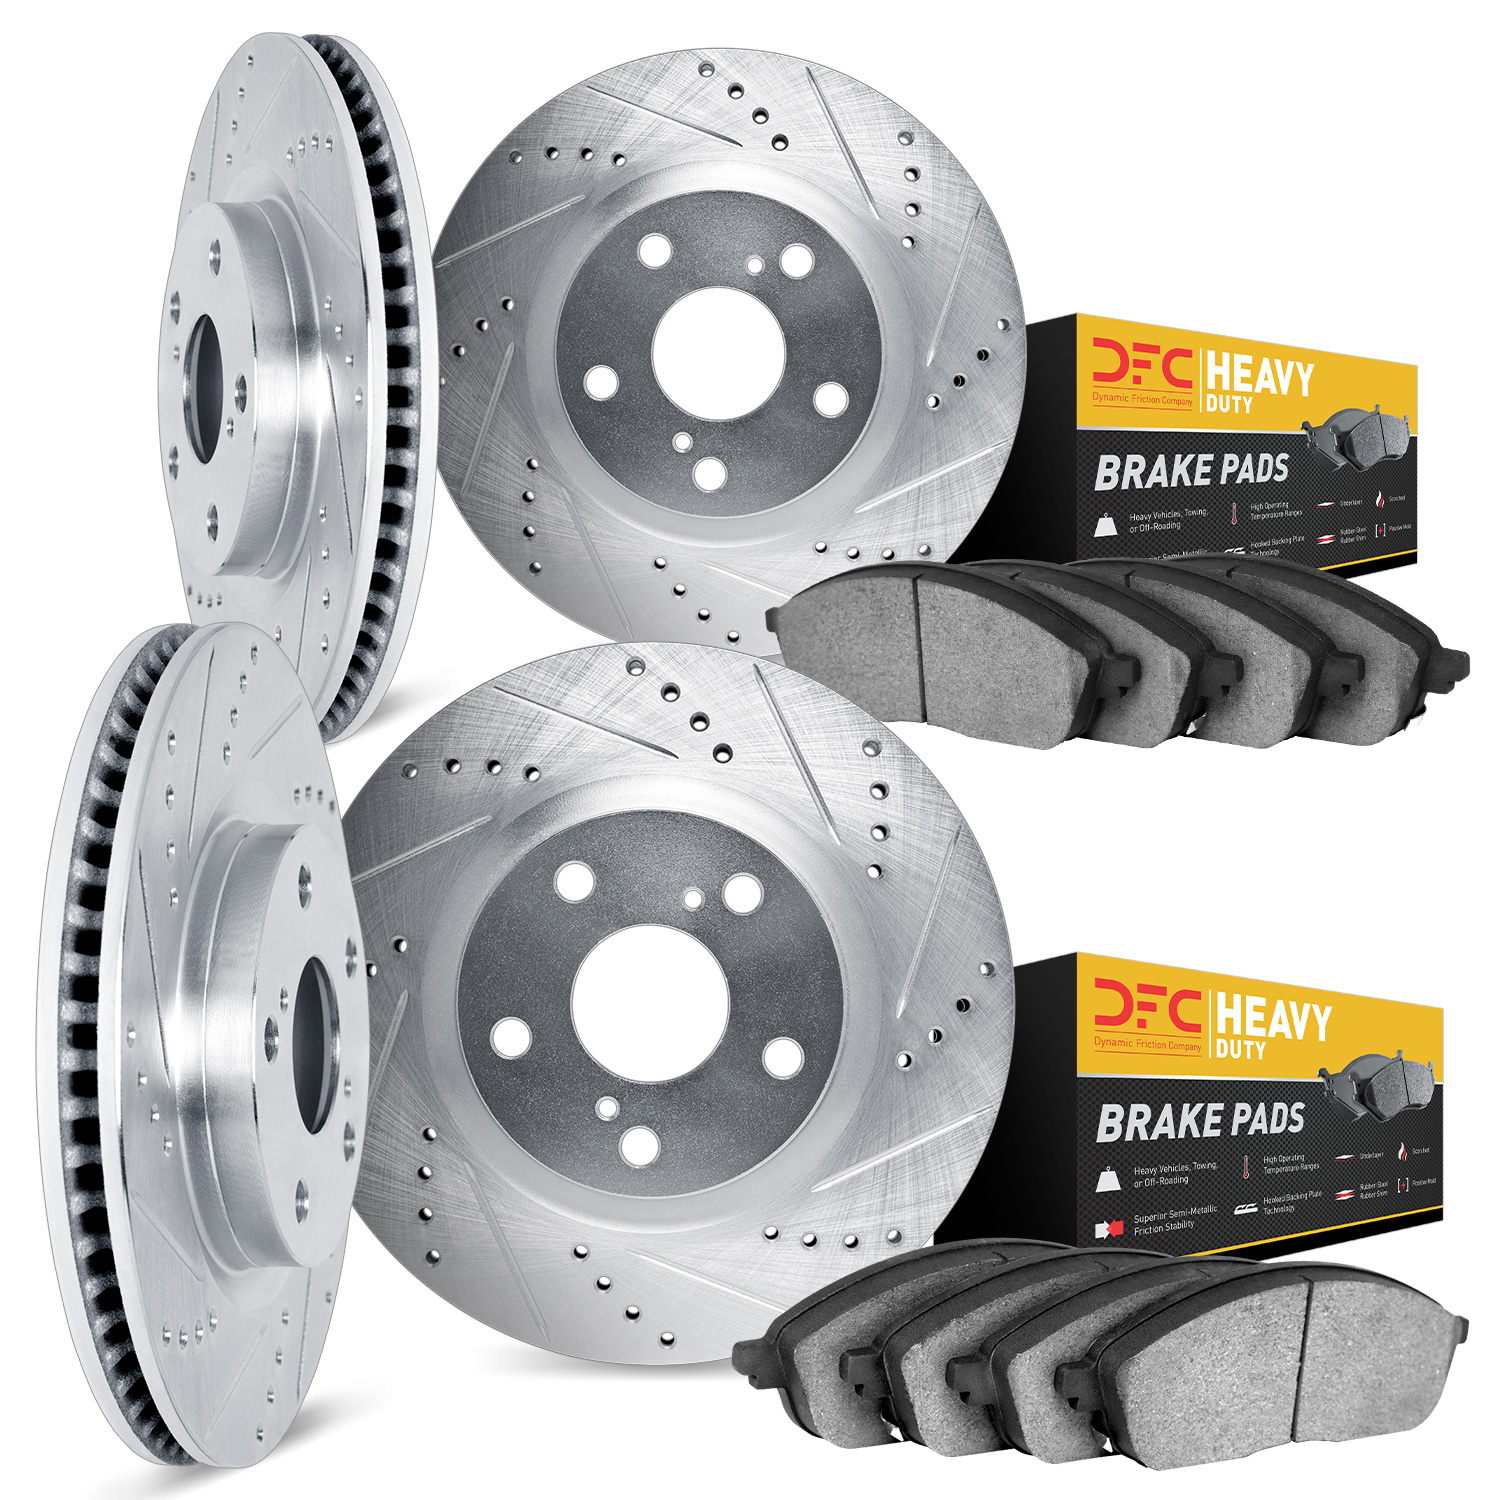 7204-99123 Drilled/Slotted Rotors w/Heavy-Duty Brake Pads Kit [Silver], 2013-2016 Ford/Lincoln/Mercury/Mazda, Position: Front an